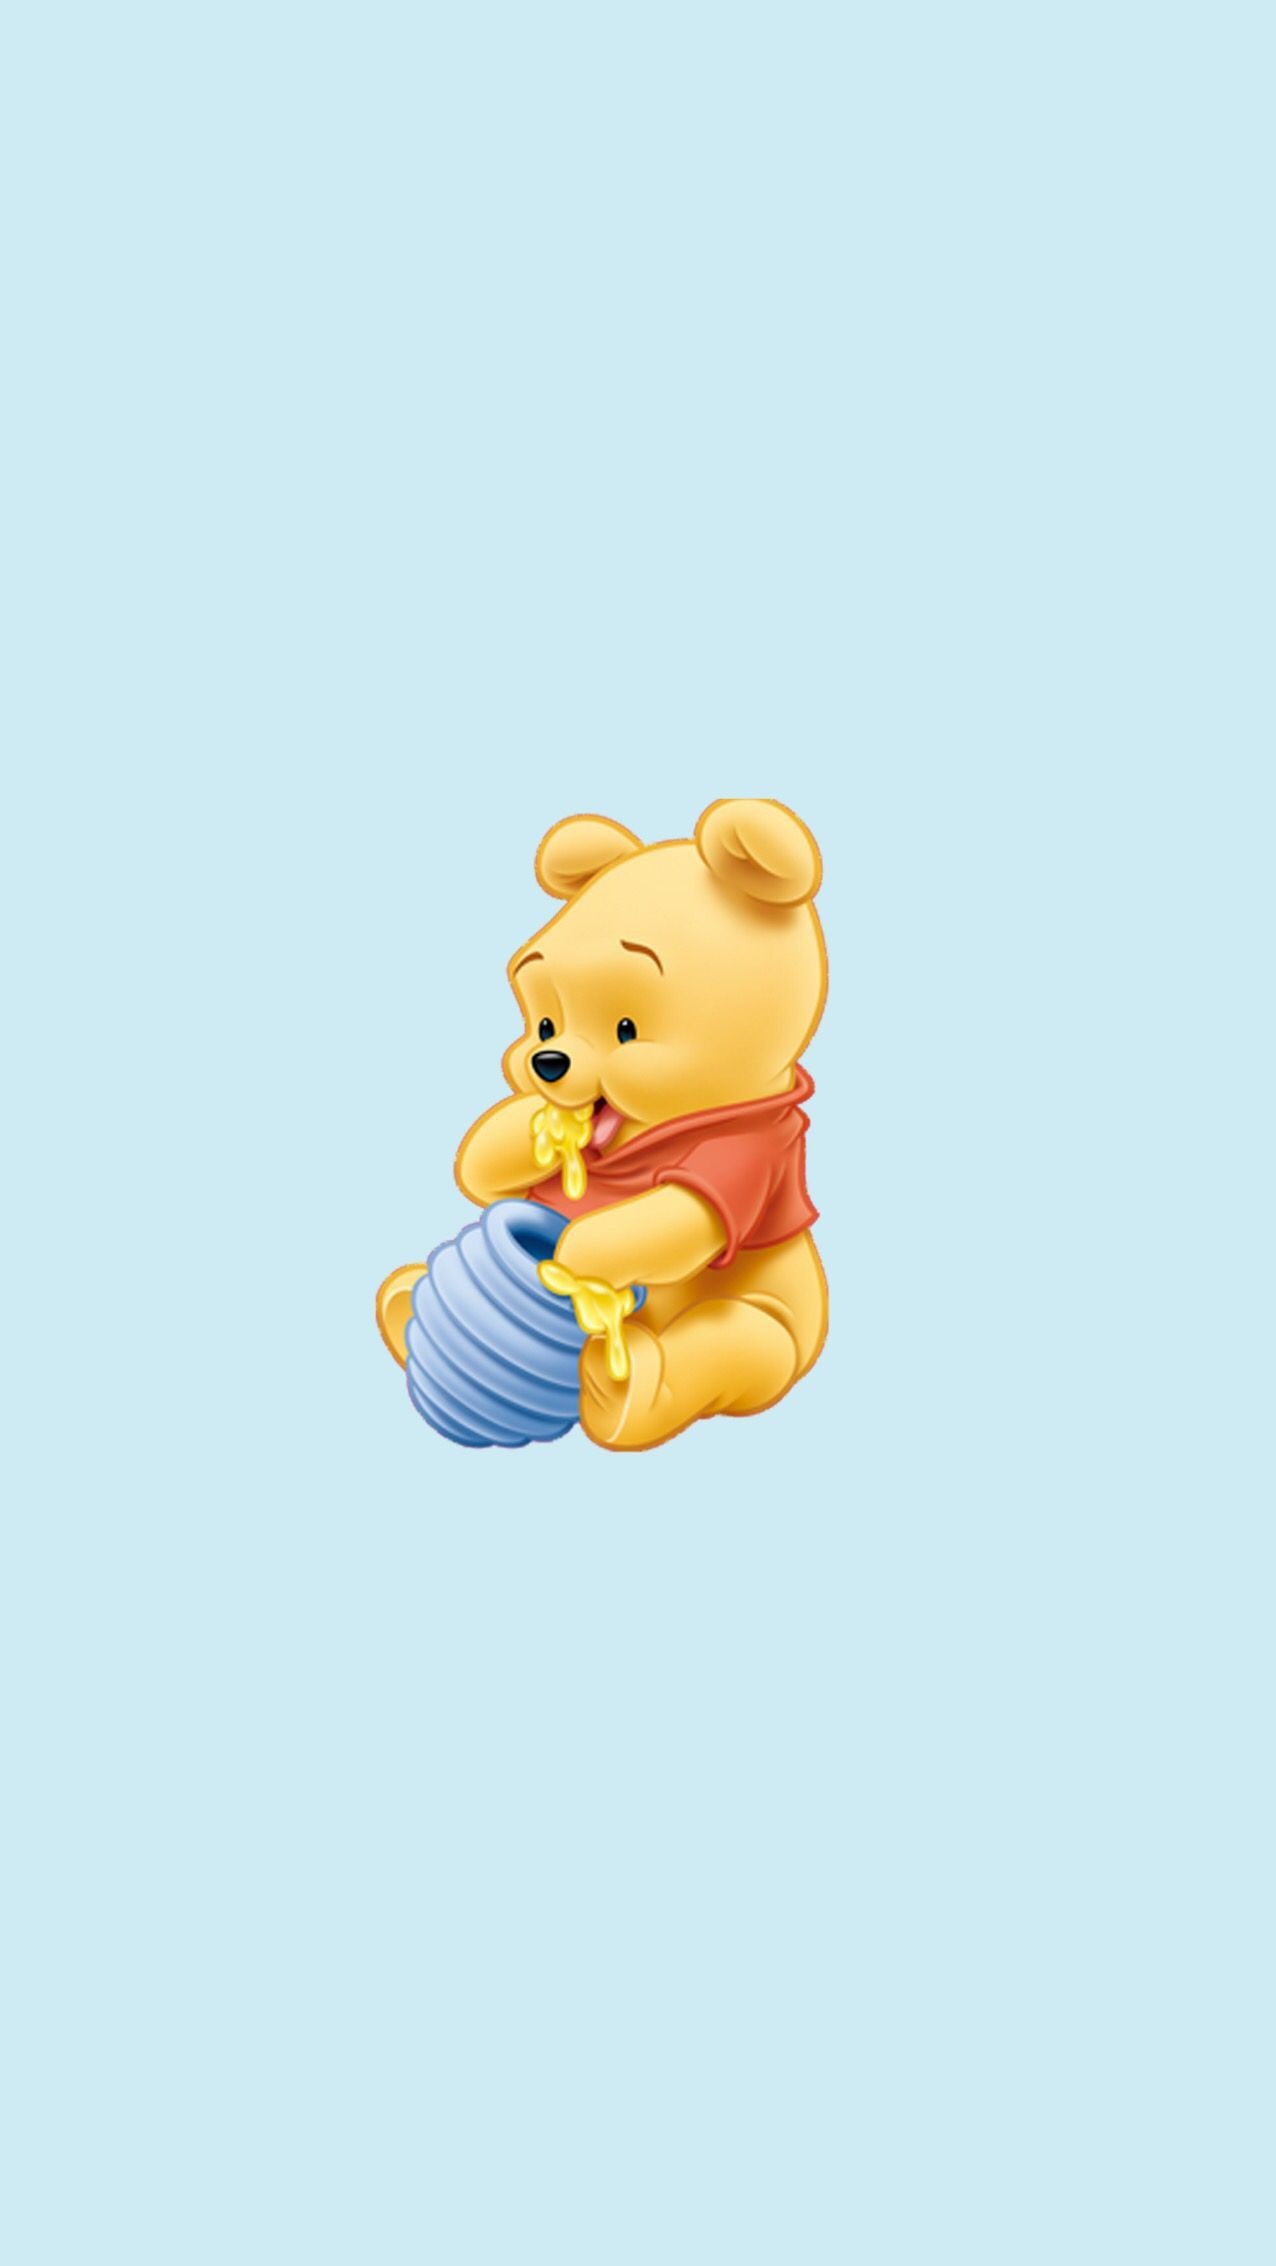 Winnie the Pooh Animation, Cute Wallpapers, Most Popular, Backgrounds, 1280x2270 HD Handy